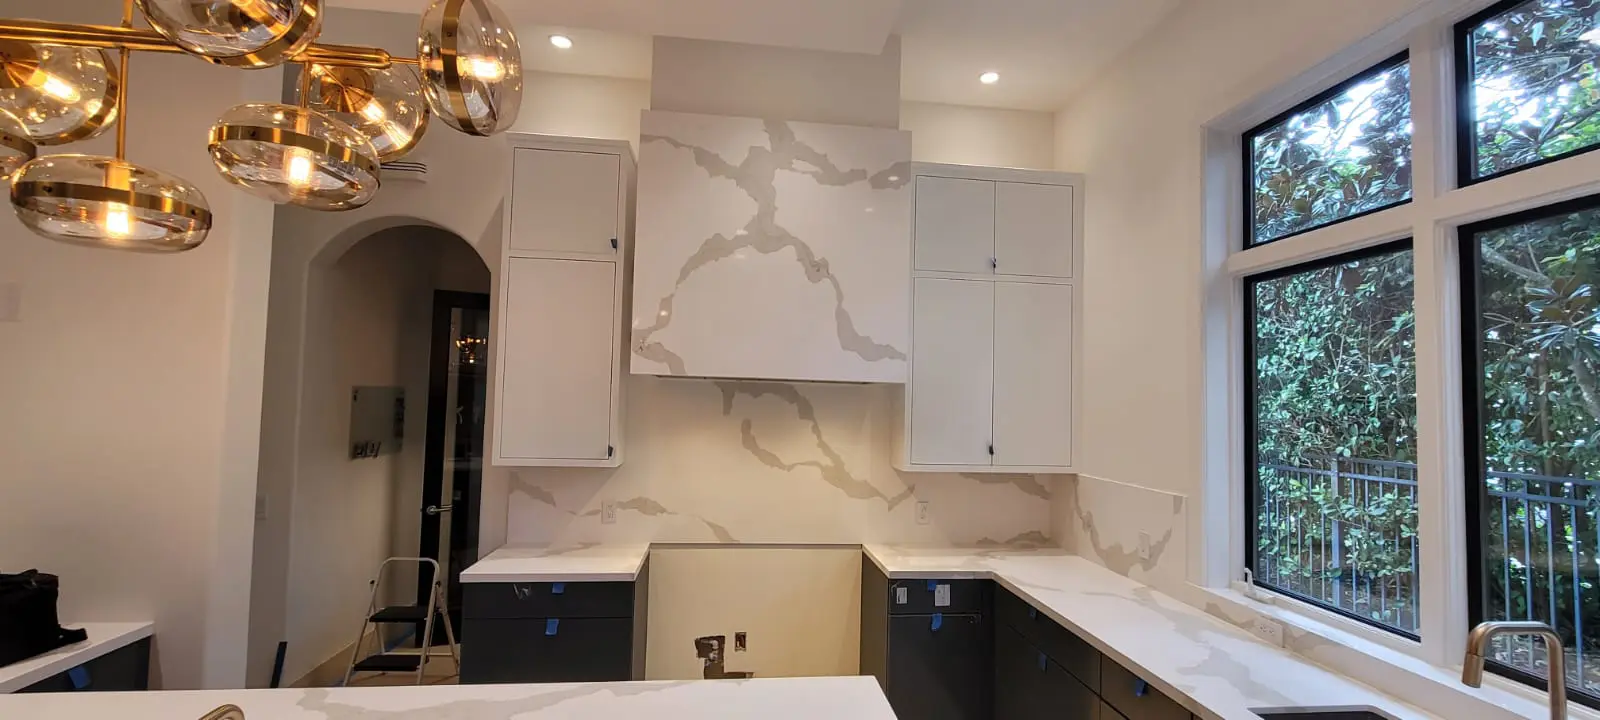 A kitchen with marble walls and counters